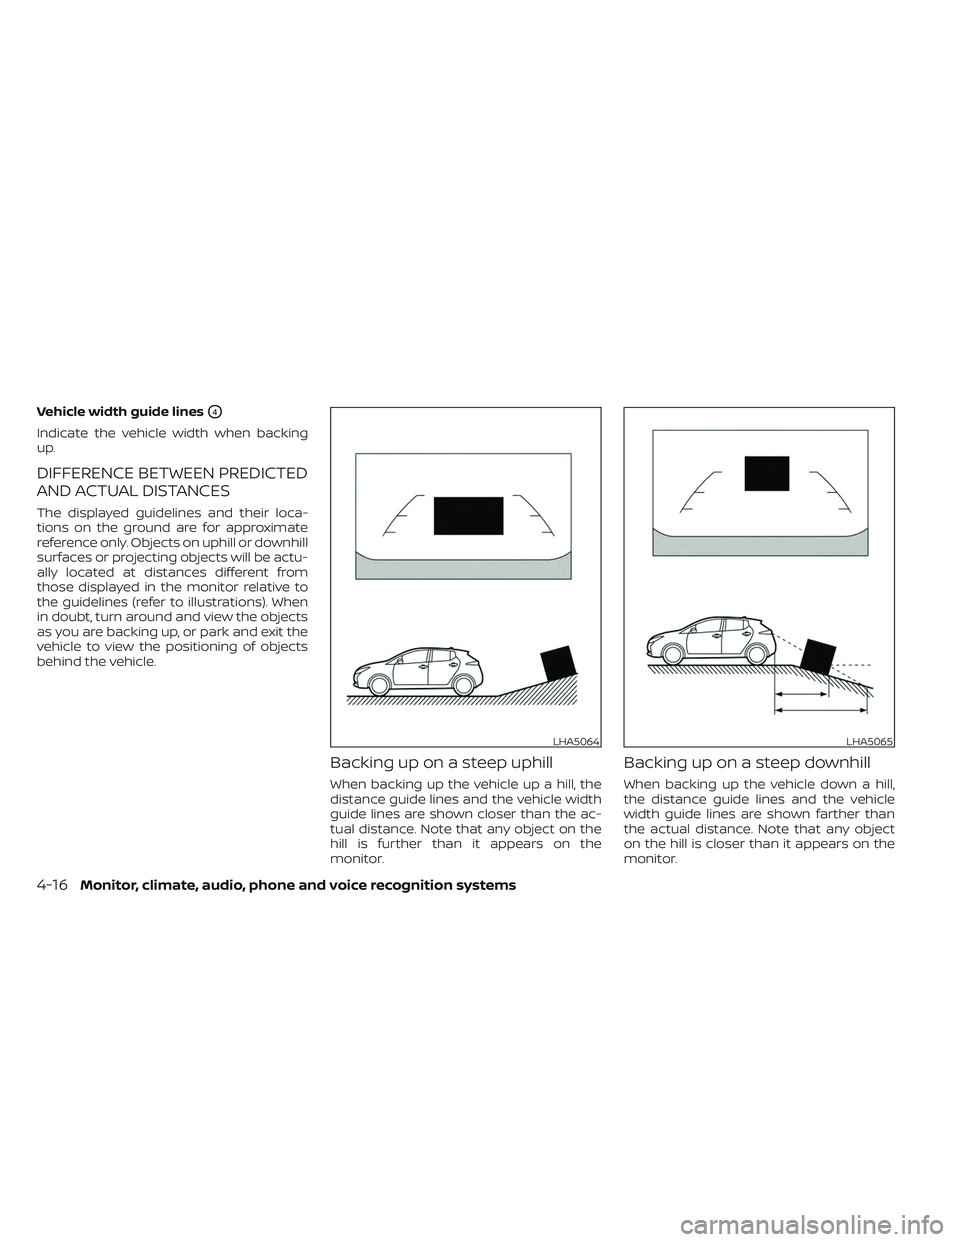 NISSAN LEAF 2023  Owners Manual Vehicle width guide linesO4
Indicate the vehicle width when backing
up.
DIFFERENCE BETWEEN PREDICTED
AND ACTUAL DISTANCES
The displayed guidelines and their loca-
tions on the ground are for approxima